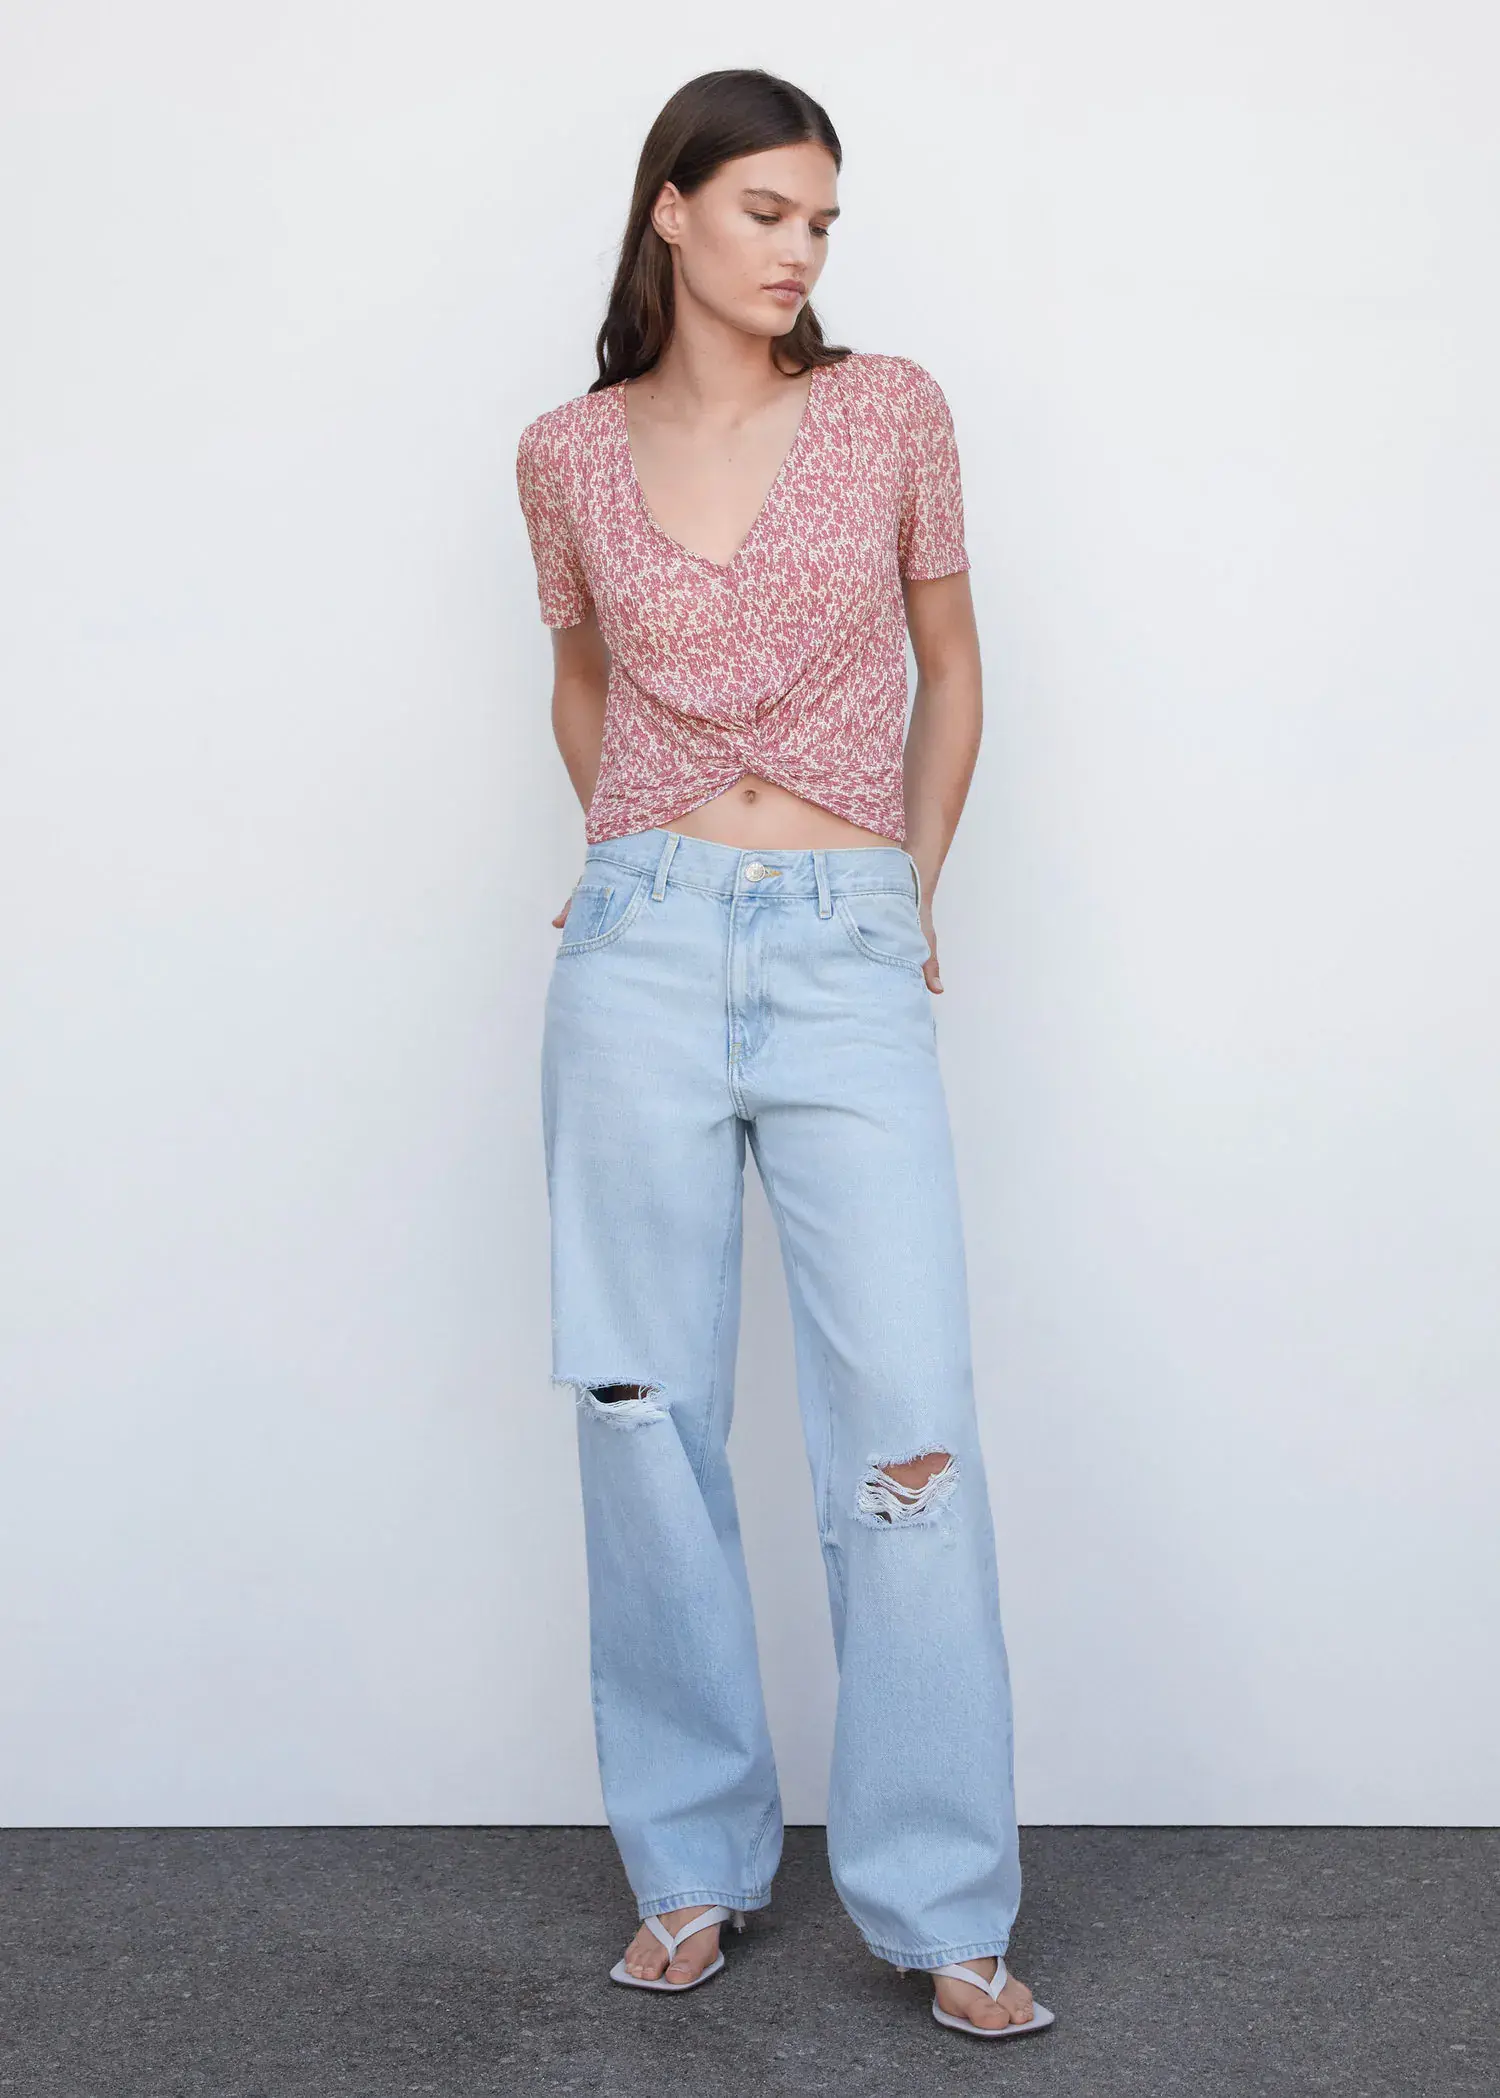 Mango Textured blouse with knot detail. a woman wearing ripped jeans and a pink top. 